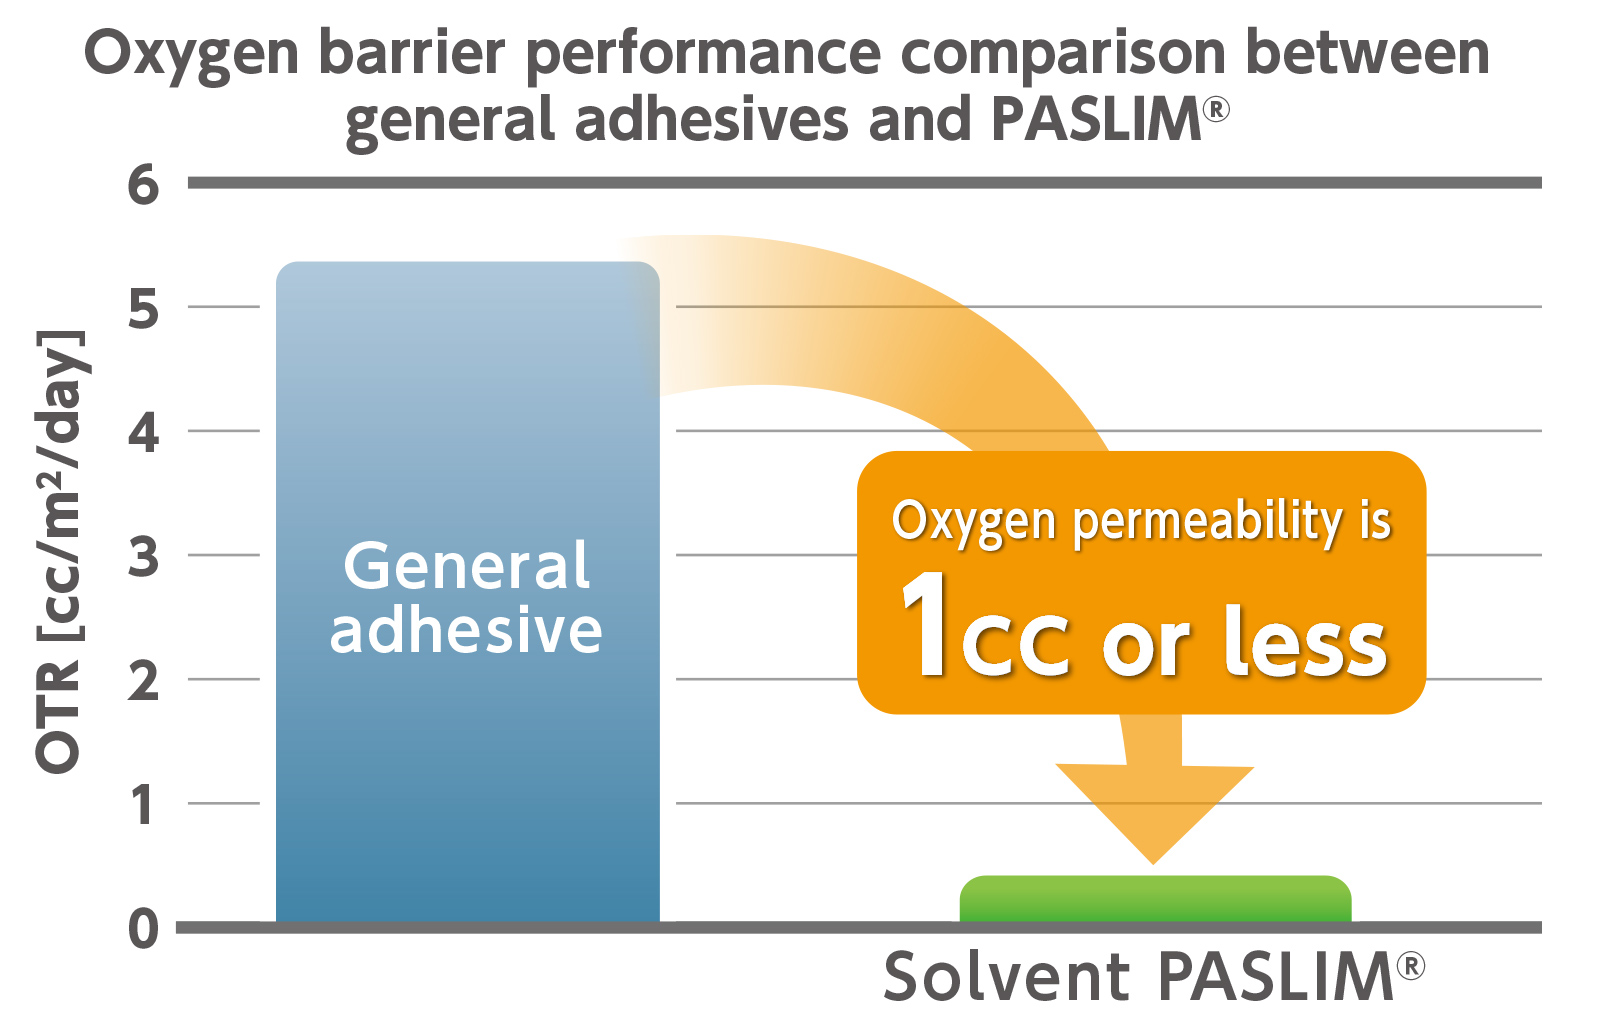 Reduces oxygen permeability of current vapor deposition packages